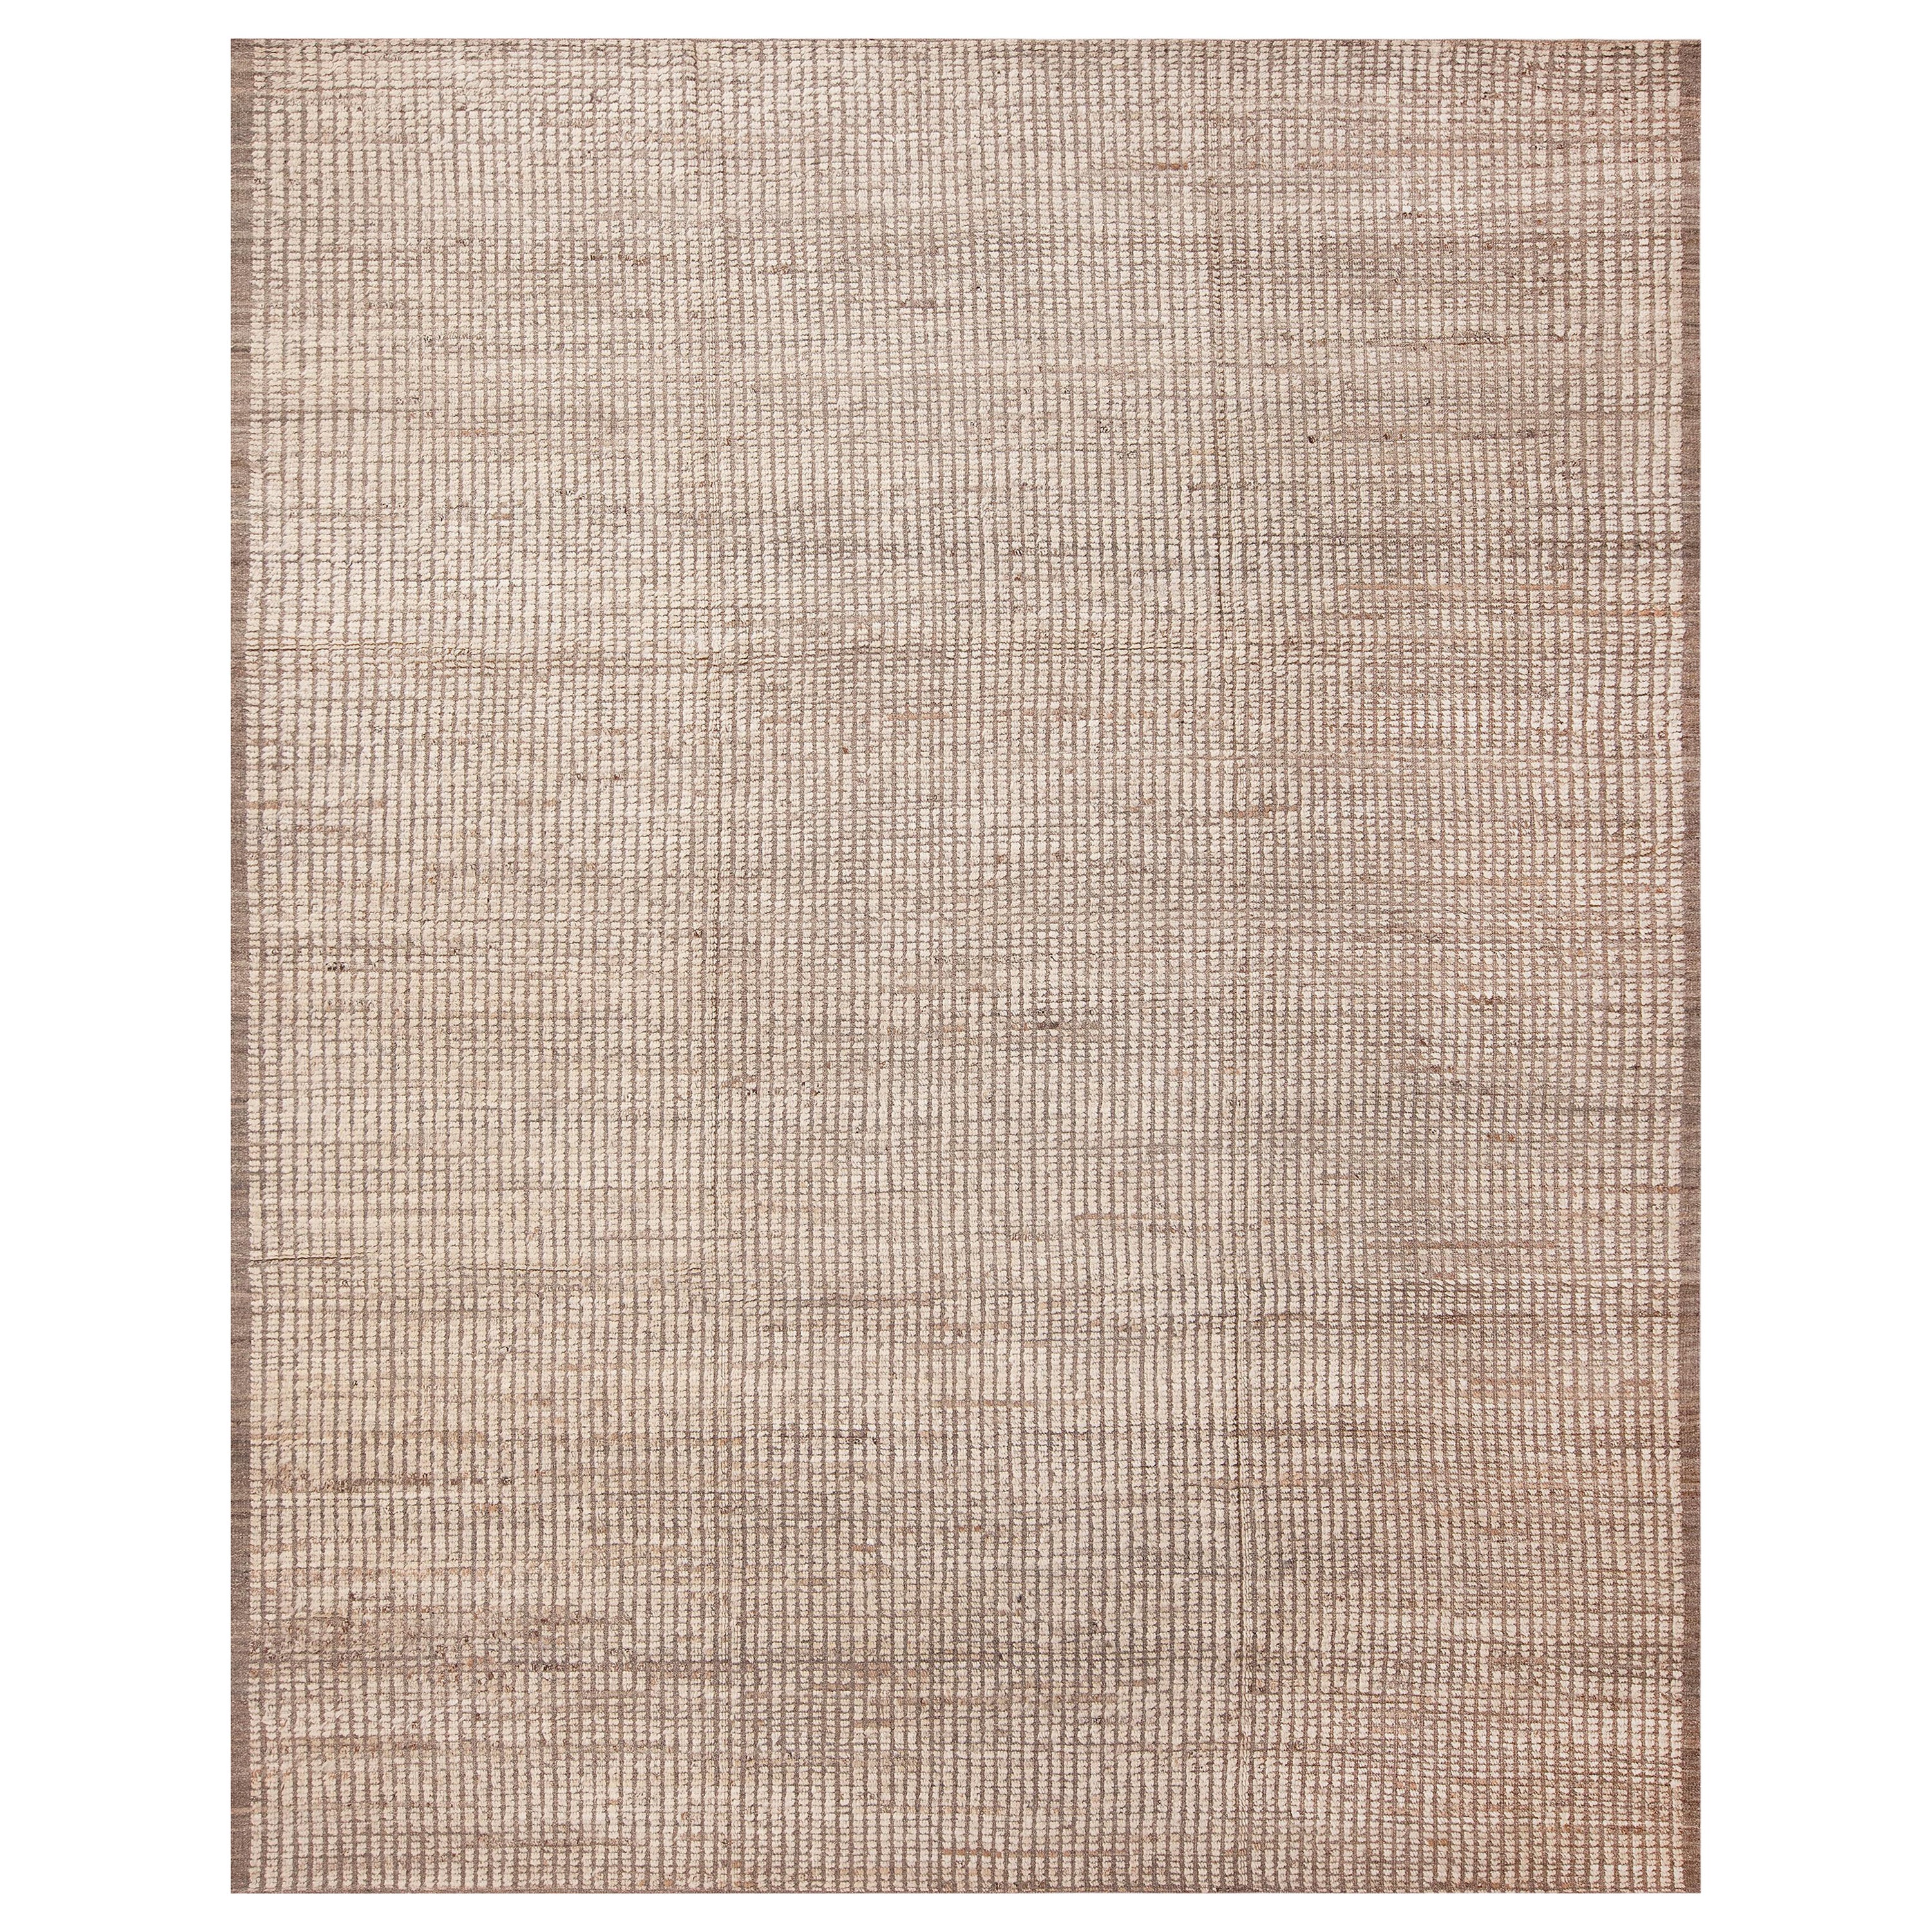 Nazmiyal Collection Contemporary Neutral Minimalist Area Rug 9'7" x 12'